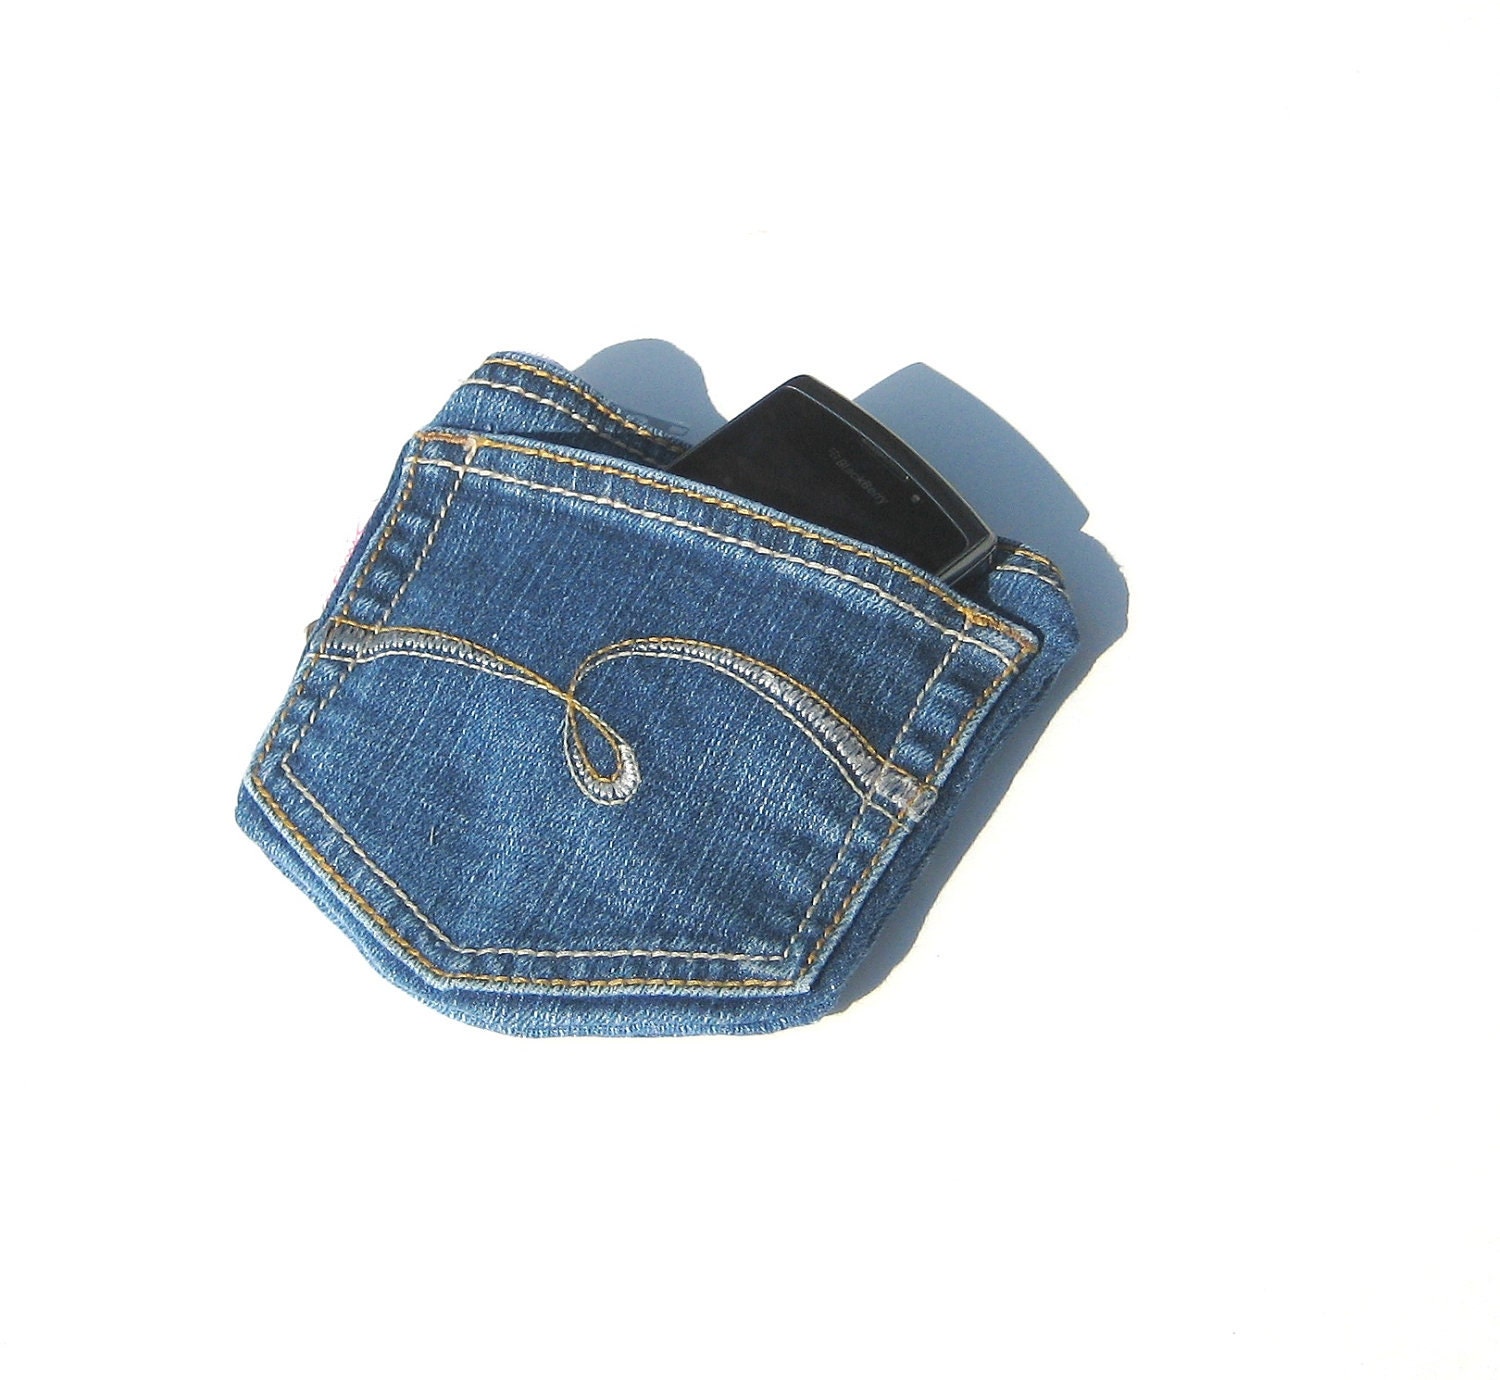 Download Gadget Case. Recycled Denim Pocket Pouch with by SmiLeStyles